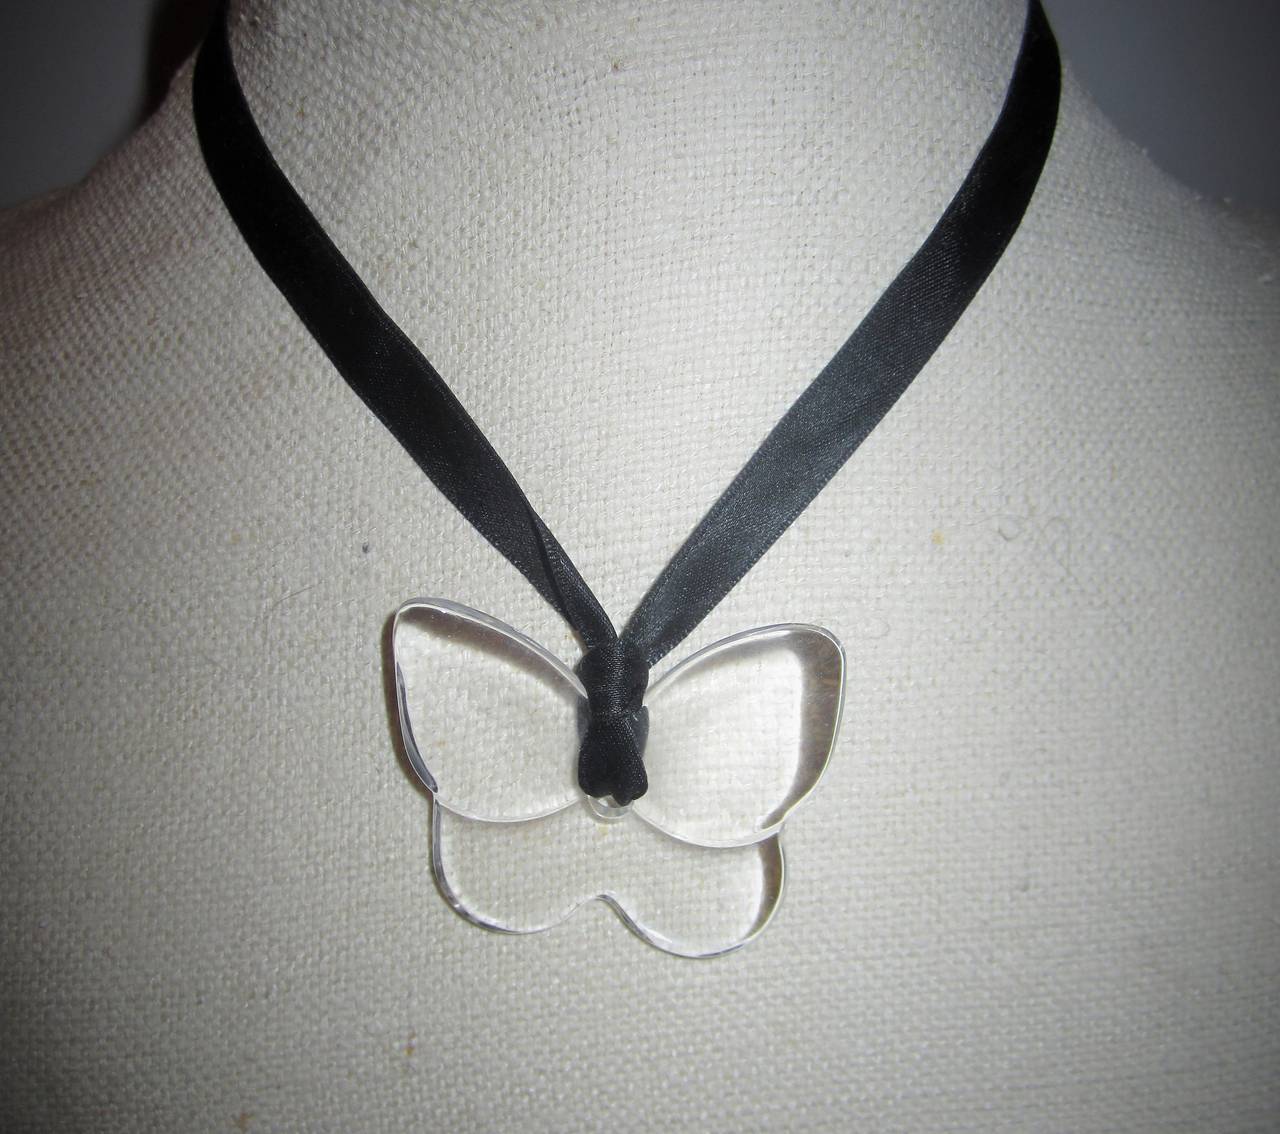 Baccarat Crystal Butterfly 'Papillon' Necklace with Black Satin Tie 2